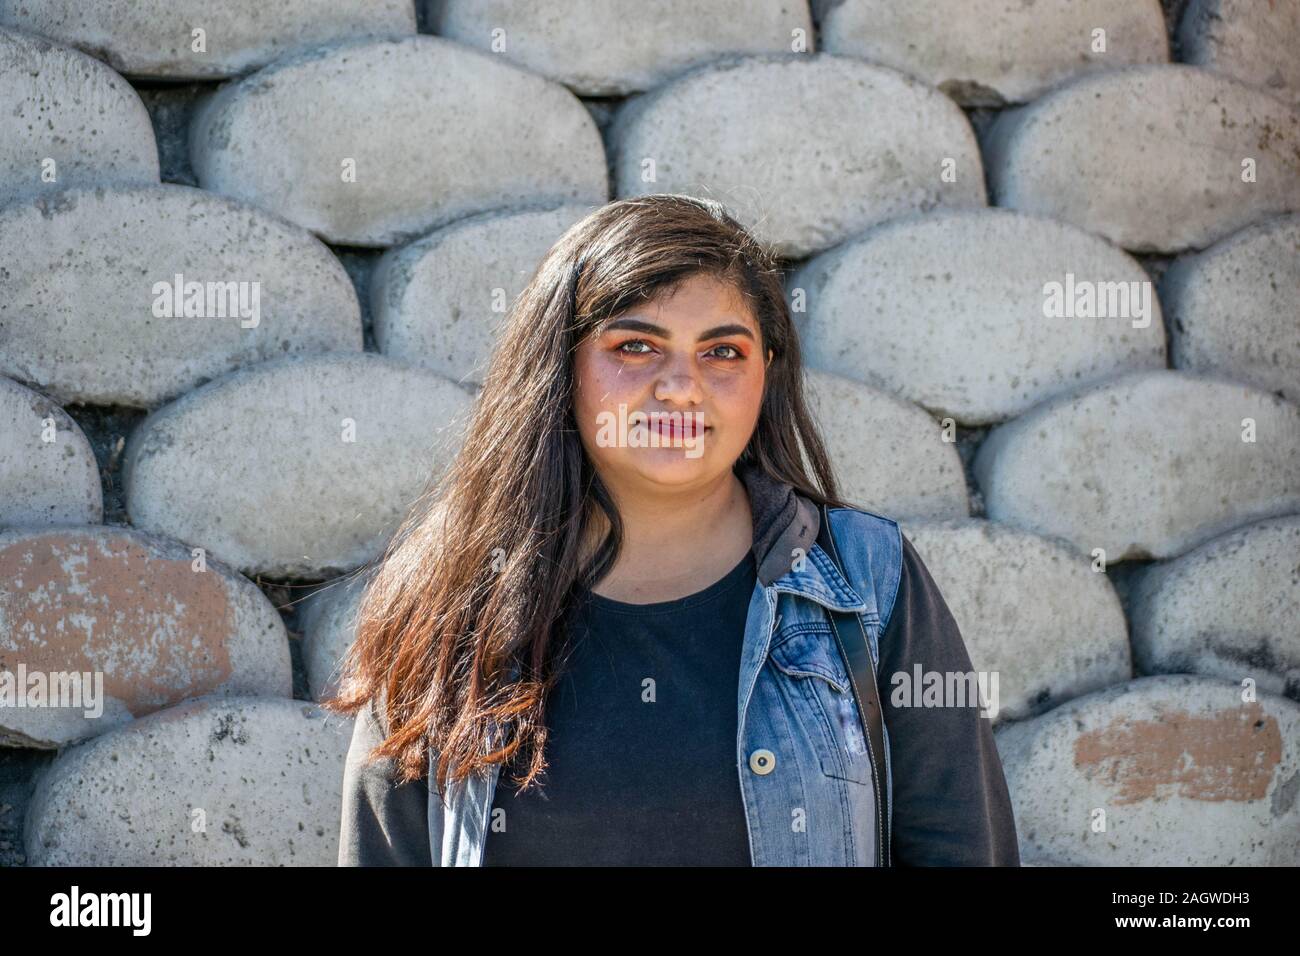 chubby woman with latin or hindu appearance in front of concrete wall Stock Photo